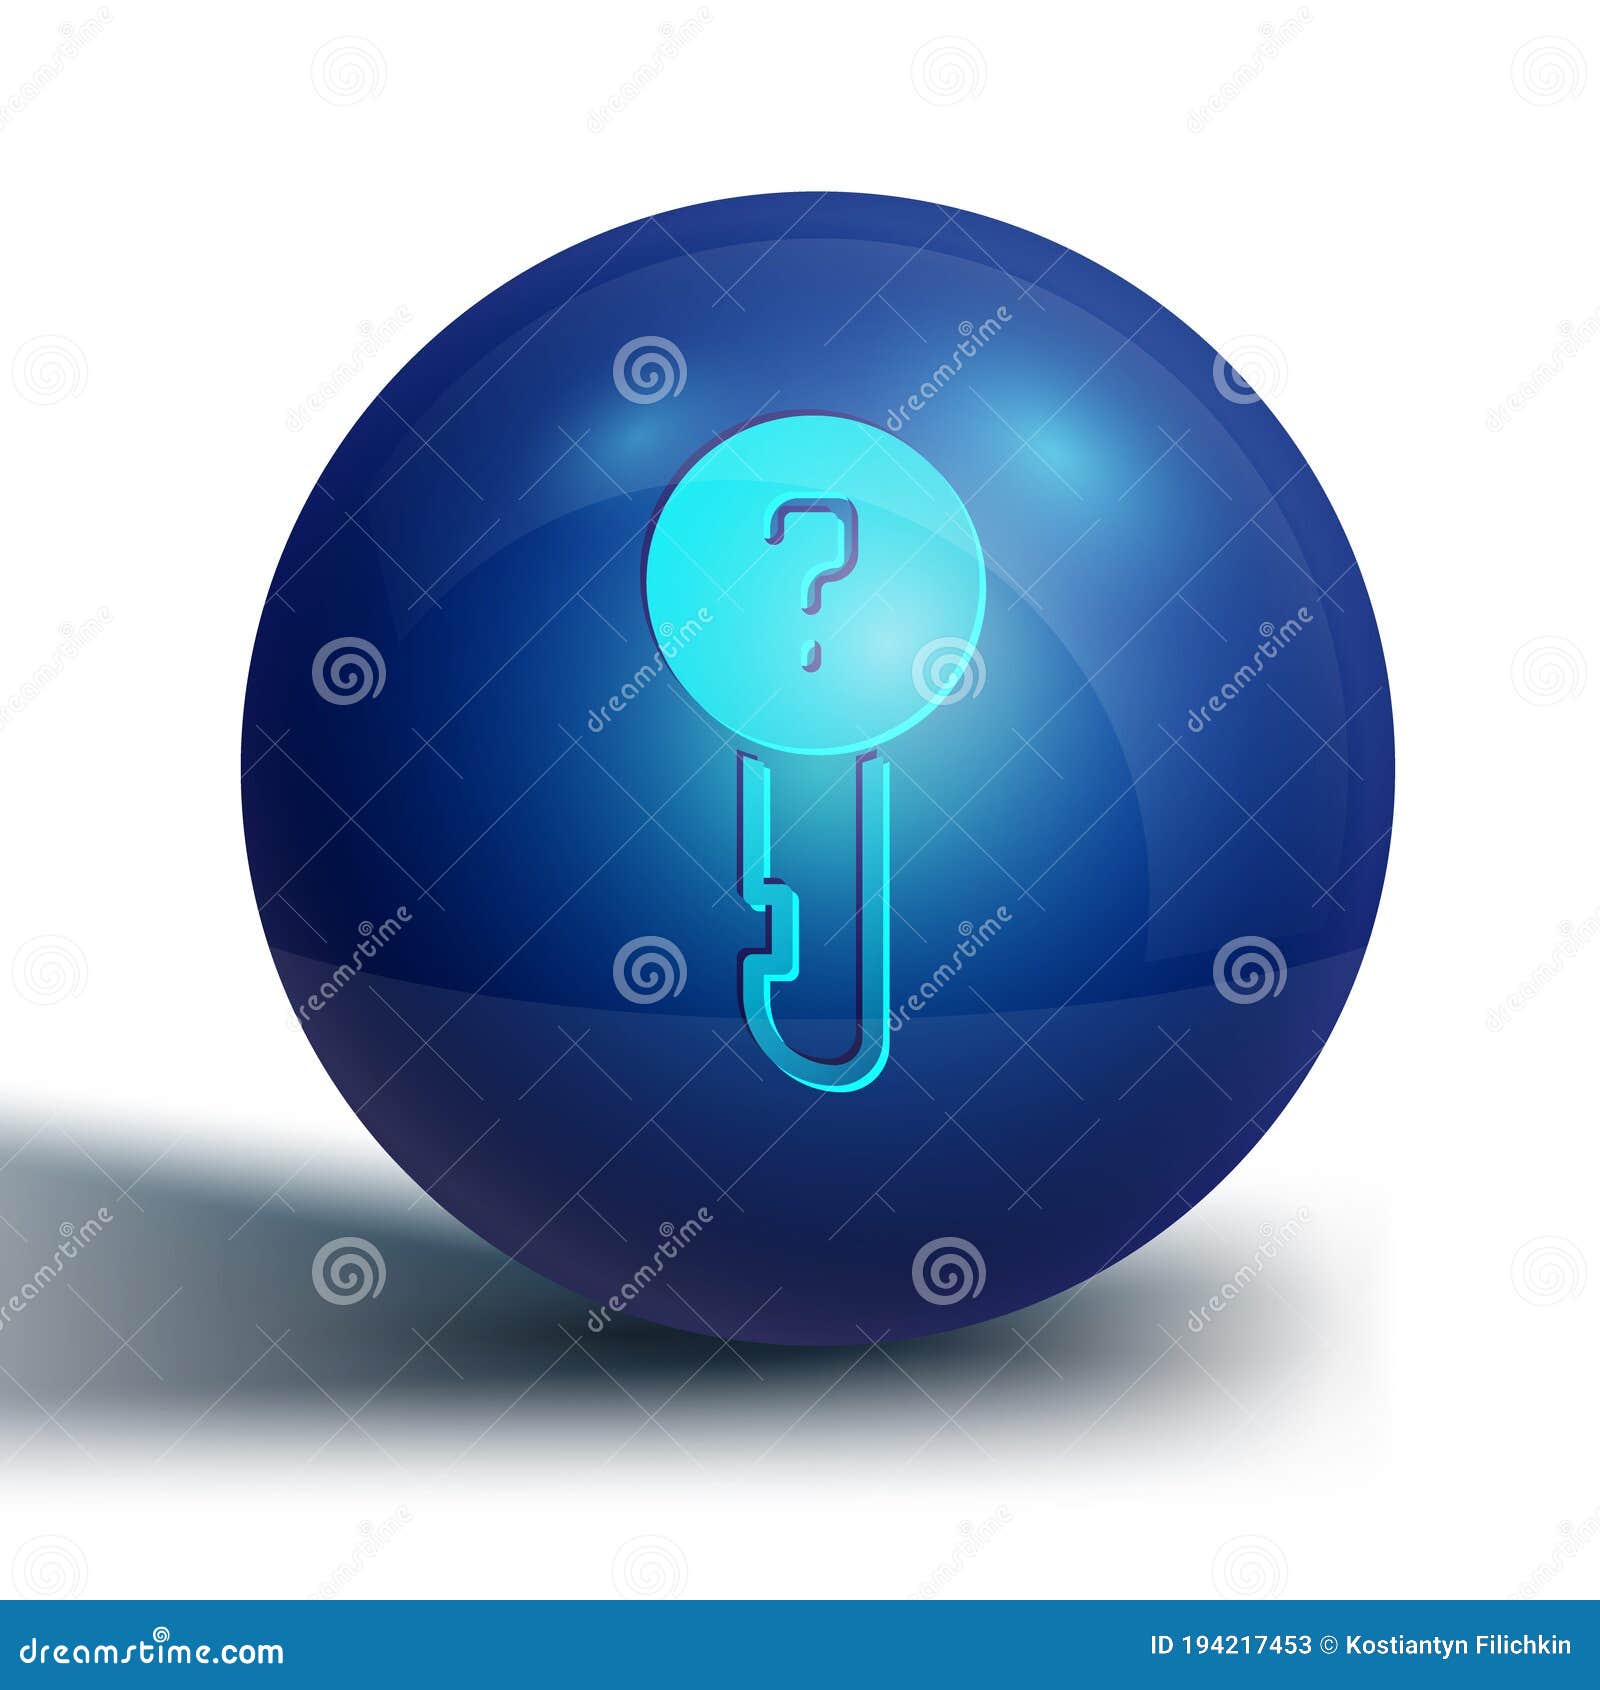 blue undefined key icon  on white background. blue circle button.  